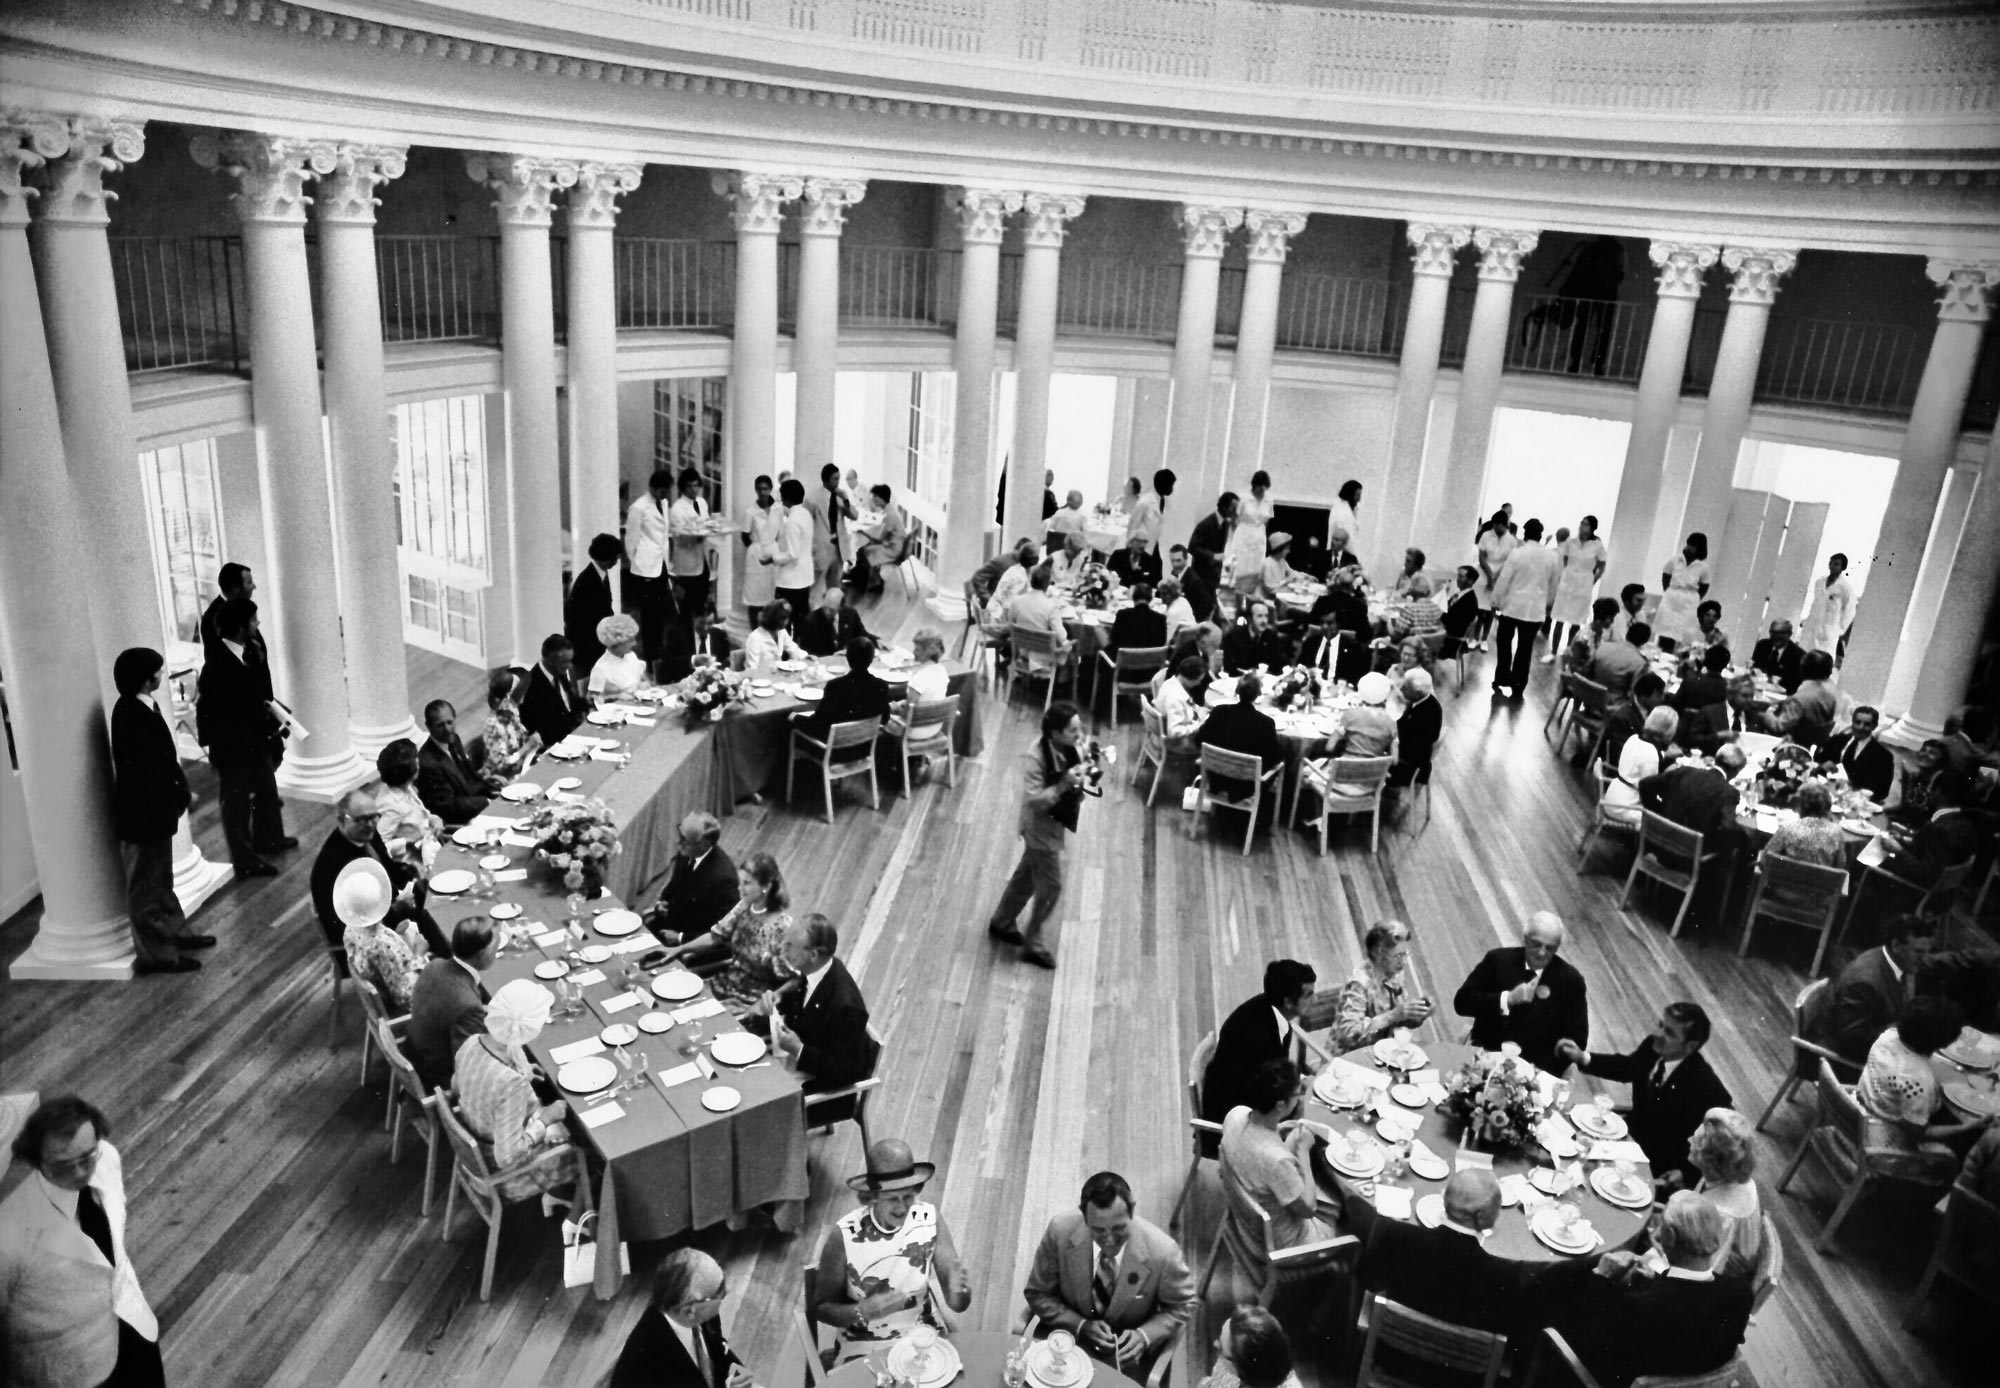 From the top floor of the Rotunda Dome Room, people are seated at several large banquet tables and serving staff line the back wall